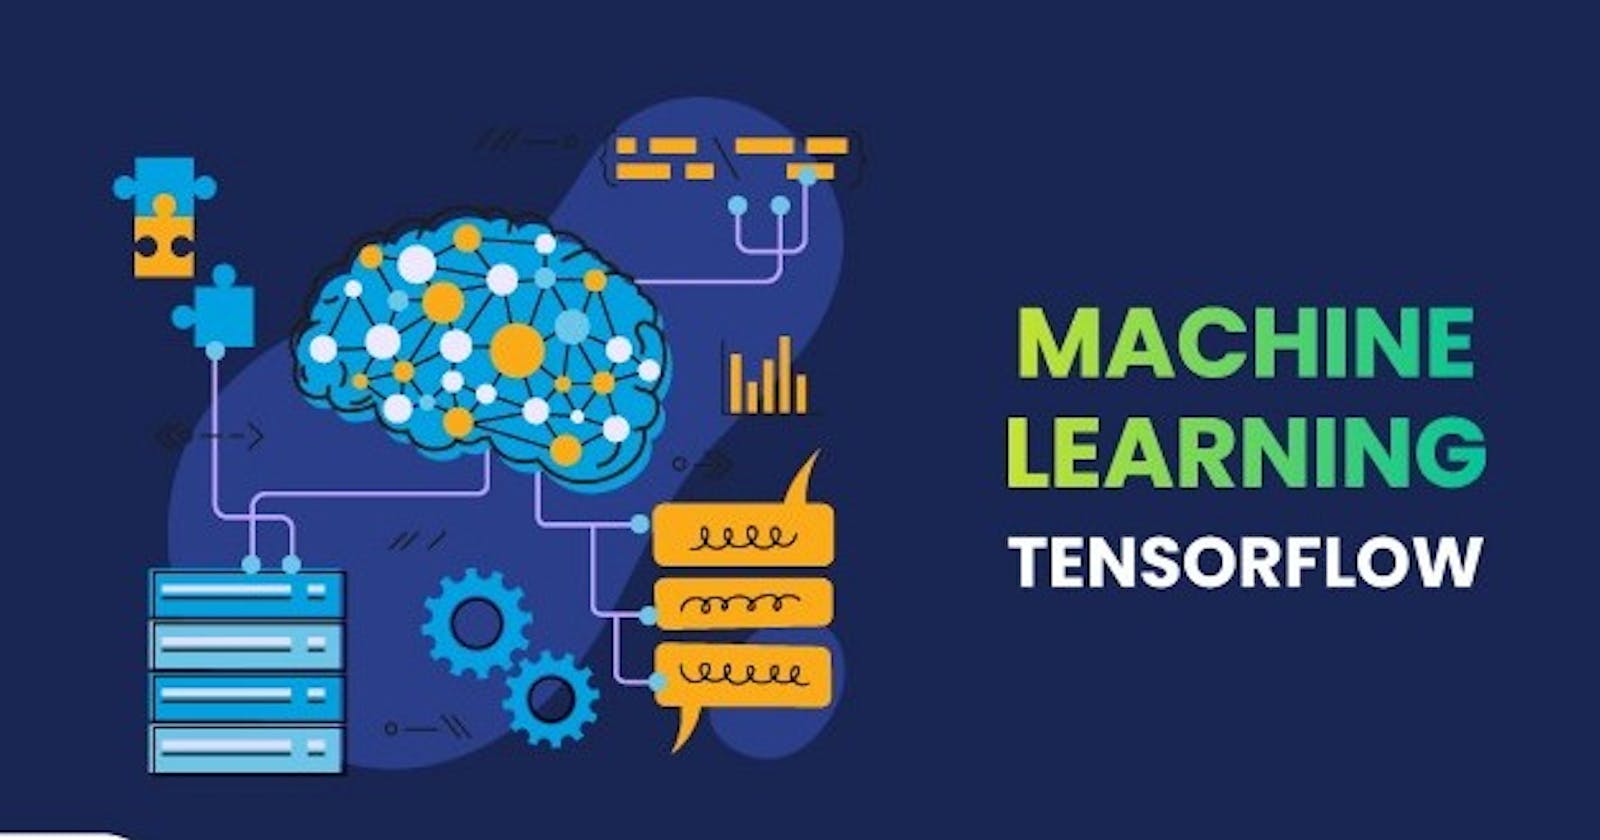 A Guide to Machine Learning with TensorFlow